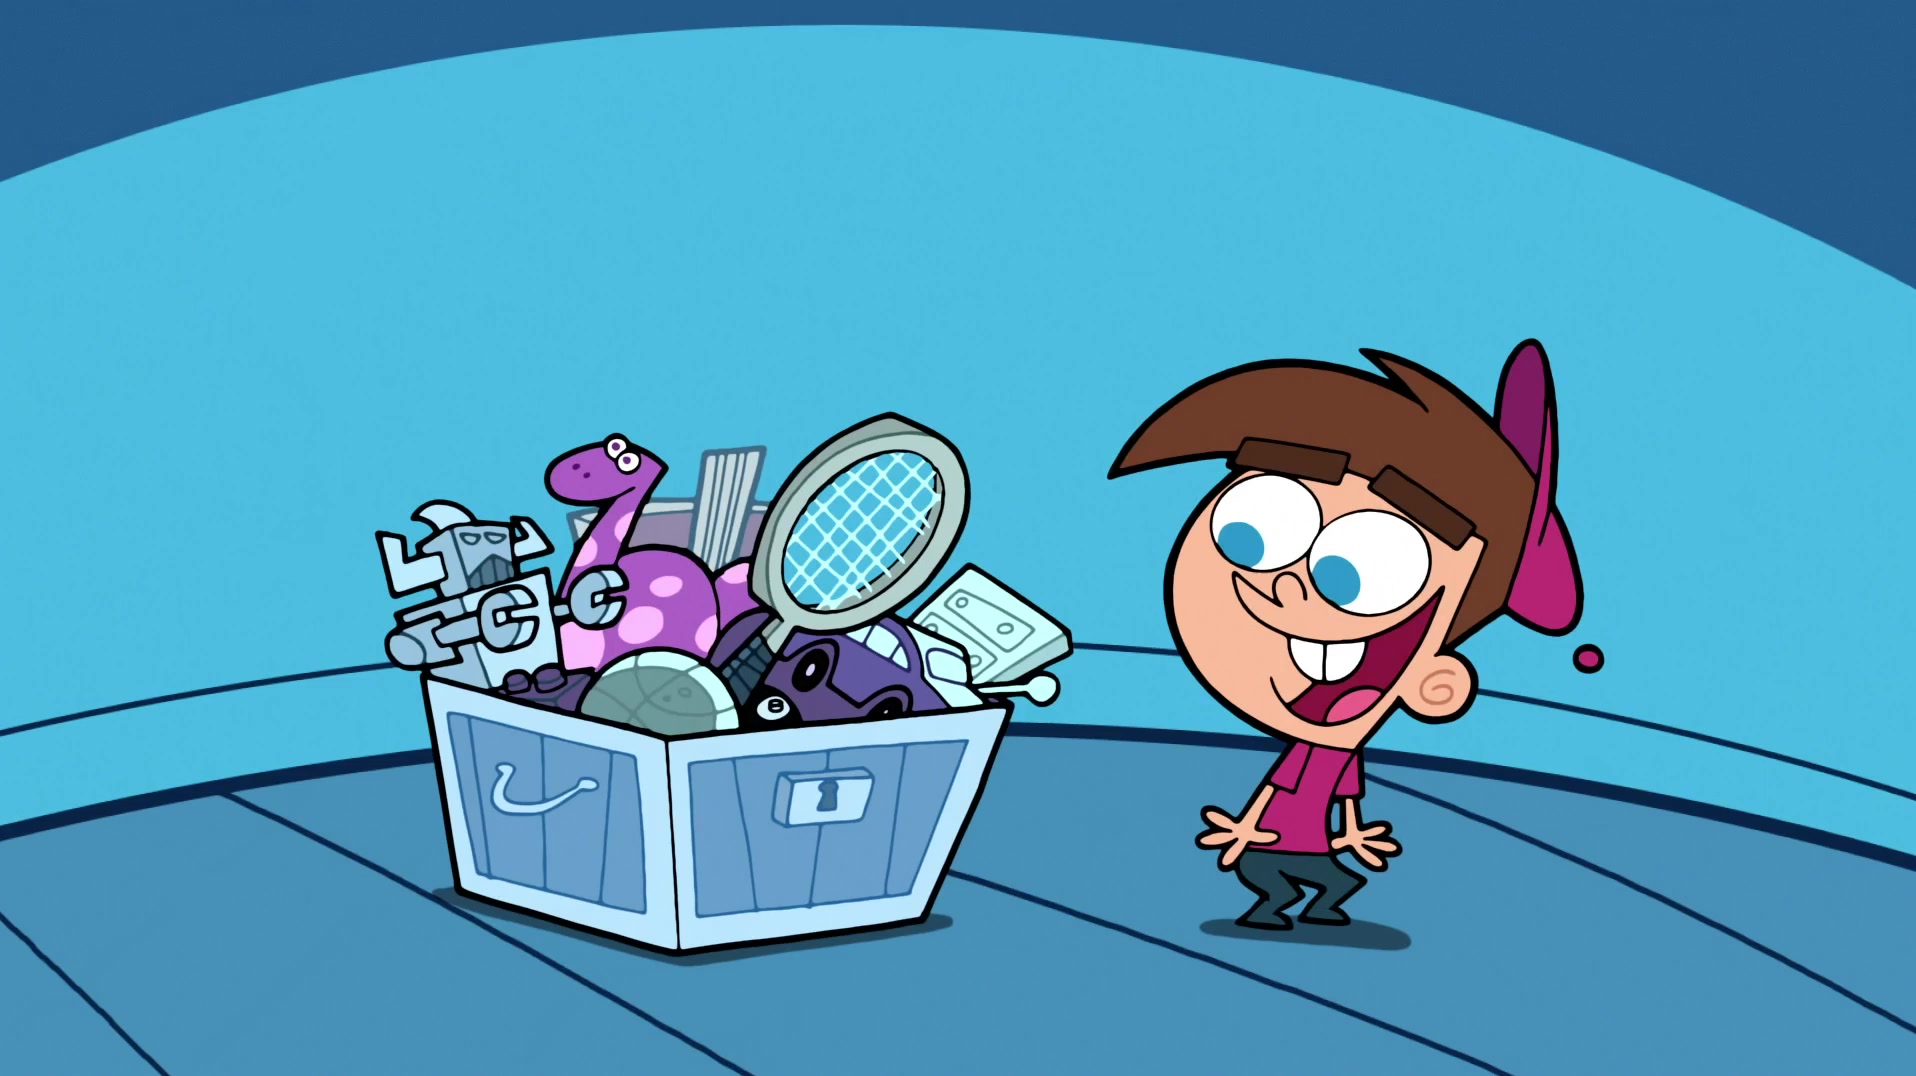 The Fairly Oddparents Timmy Turner Wallpaper 3188 1916 x 1076 1916x1076